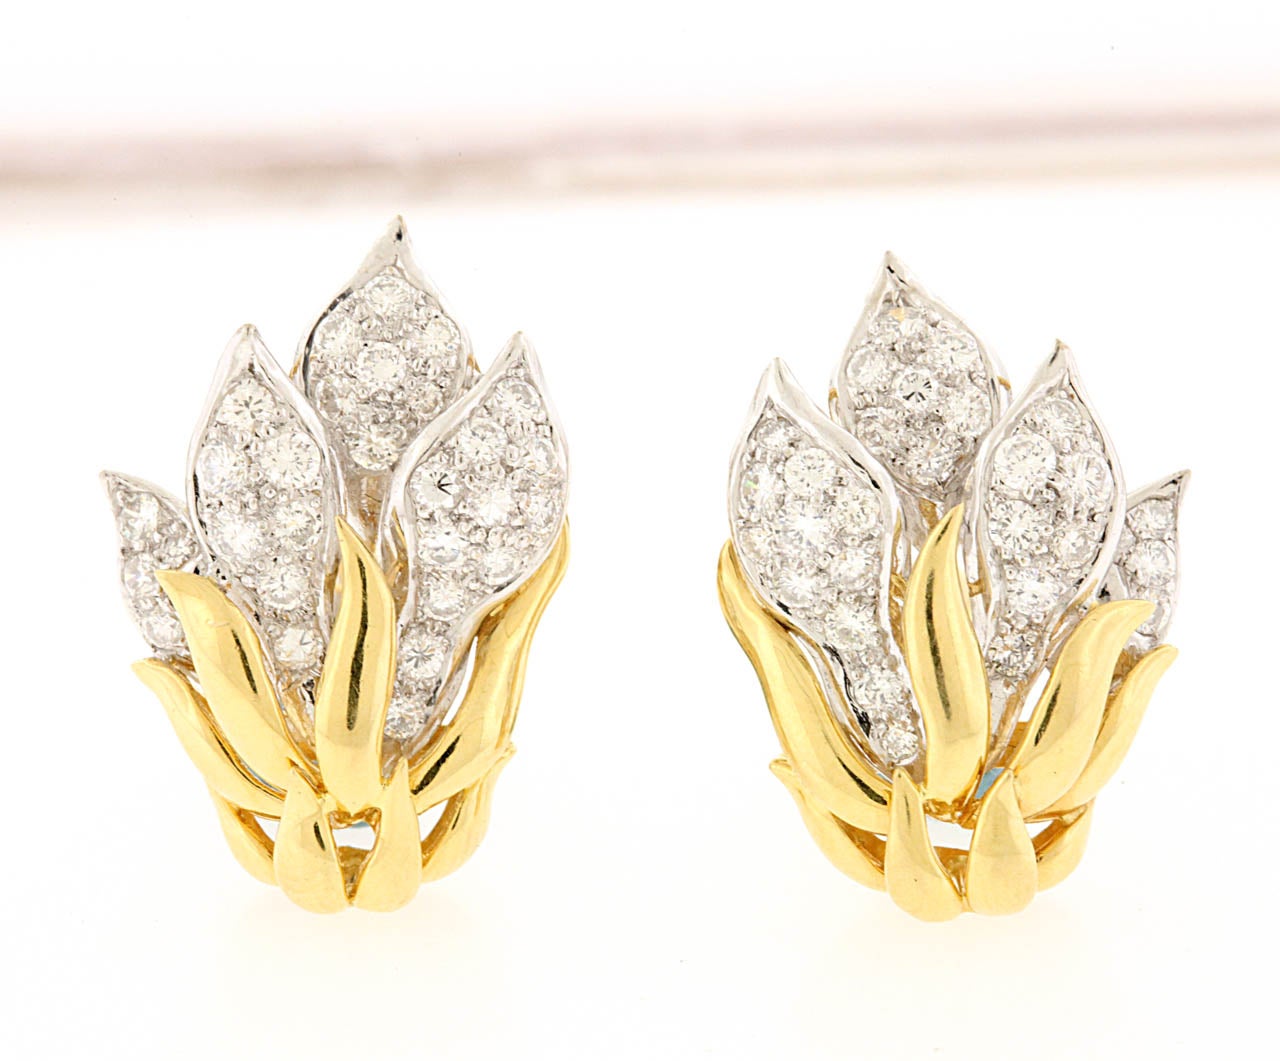 Diamond flame earrings, circa 1980's, are set with diamond pavé stylized leaves rising from 18K yellow gold petals, all in 18K gold, measuring 1/2